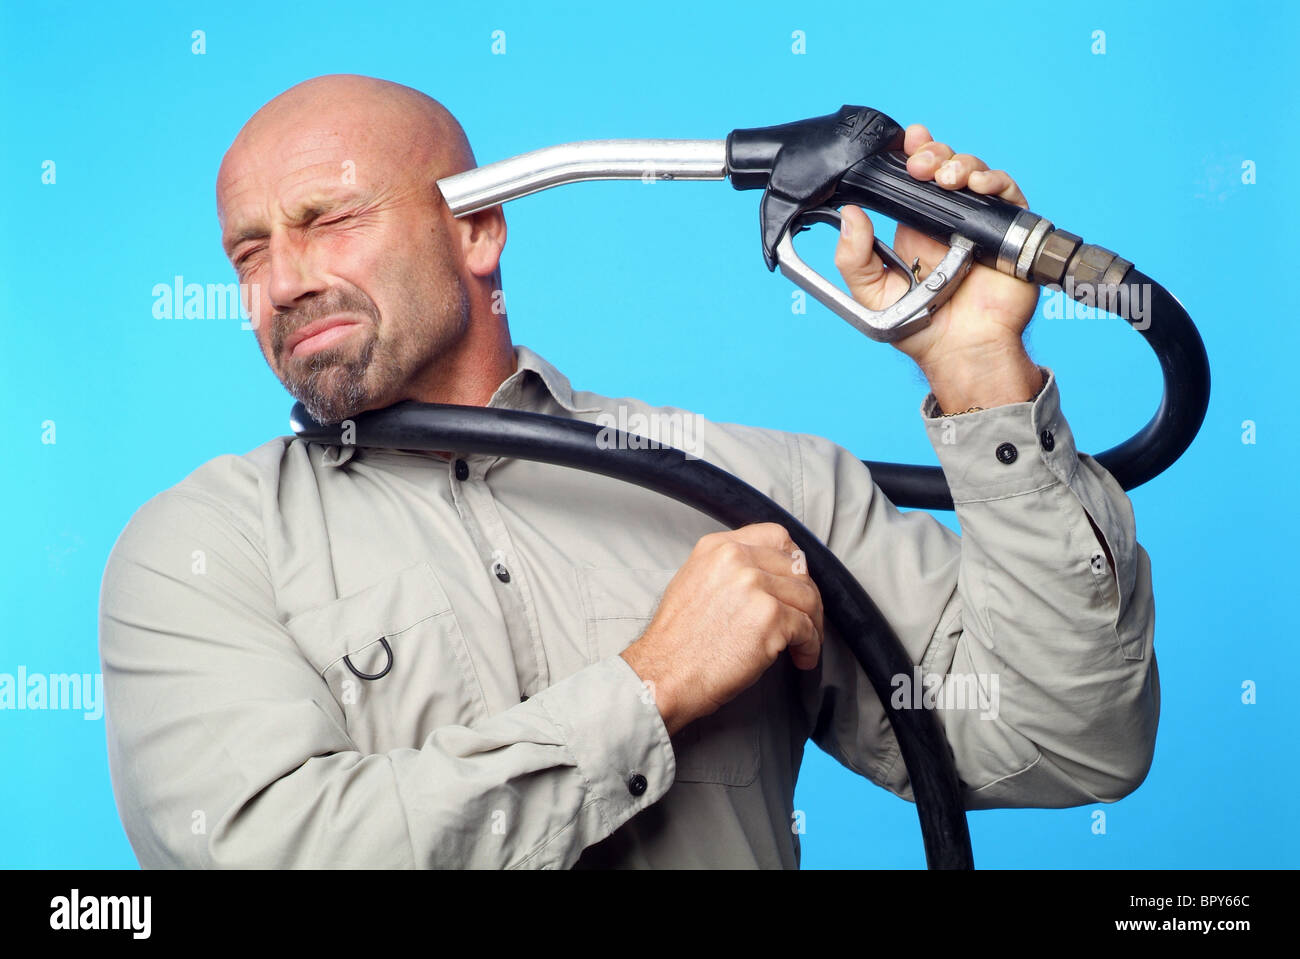 Man holding a petrol nozzle against his head Stock Photo